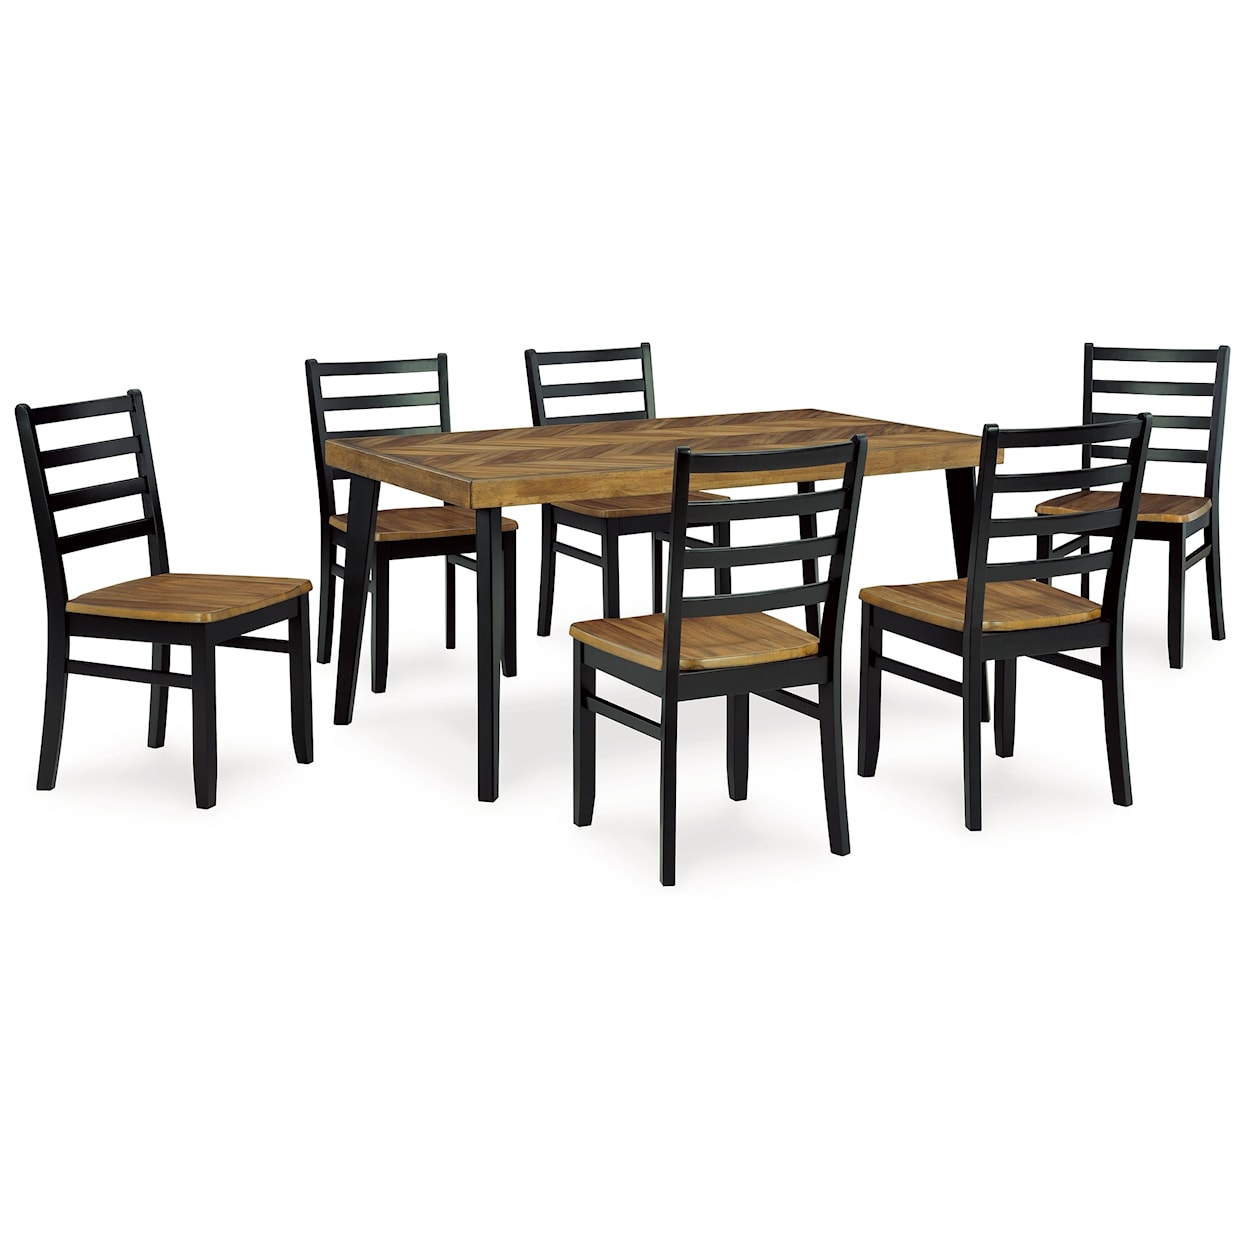 Signature Blondon Dining Table And 6 Chairs (Set Of 7)